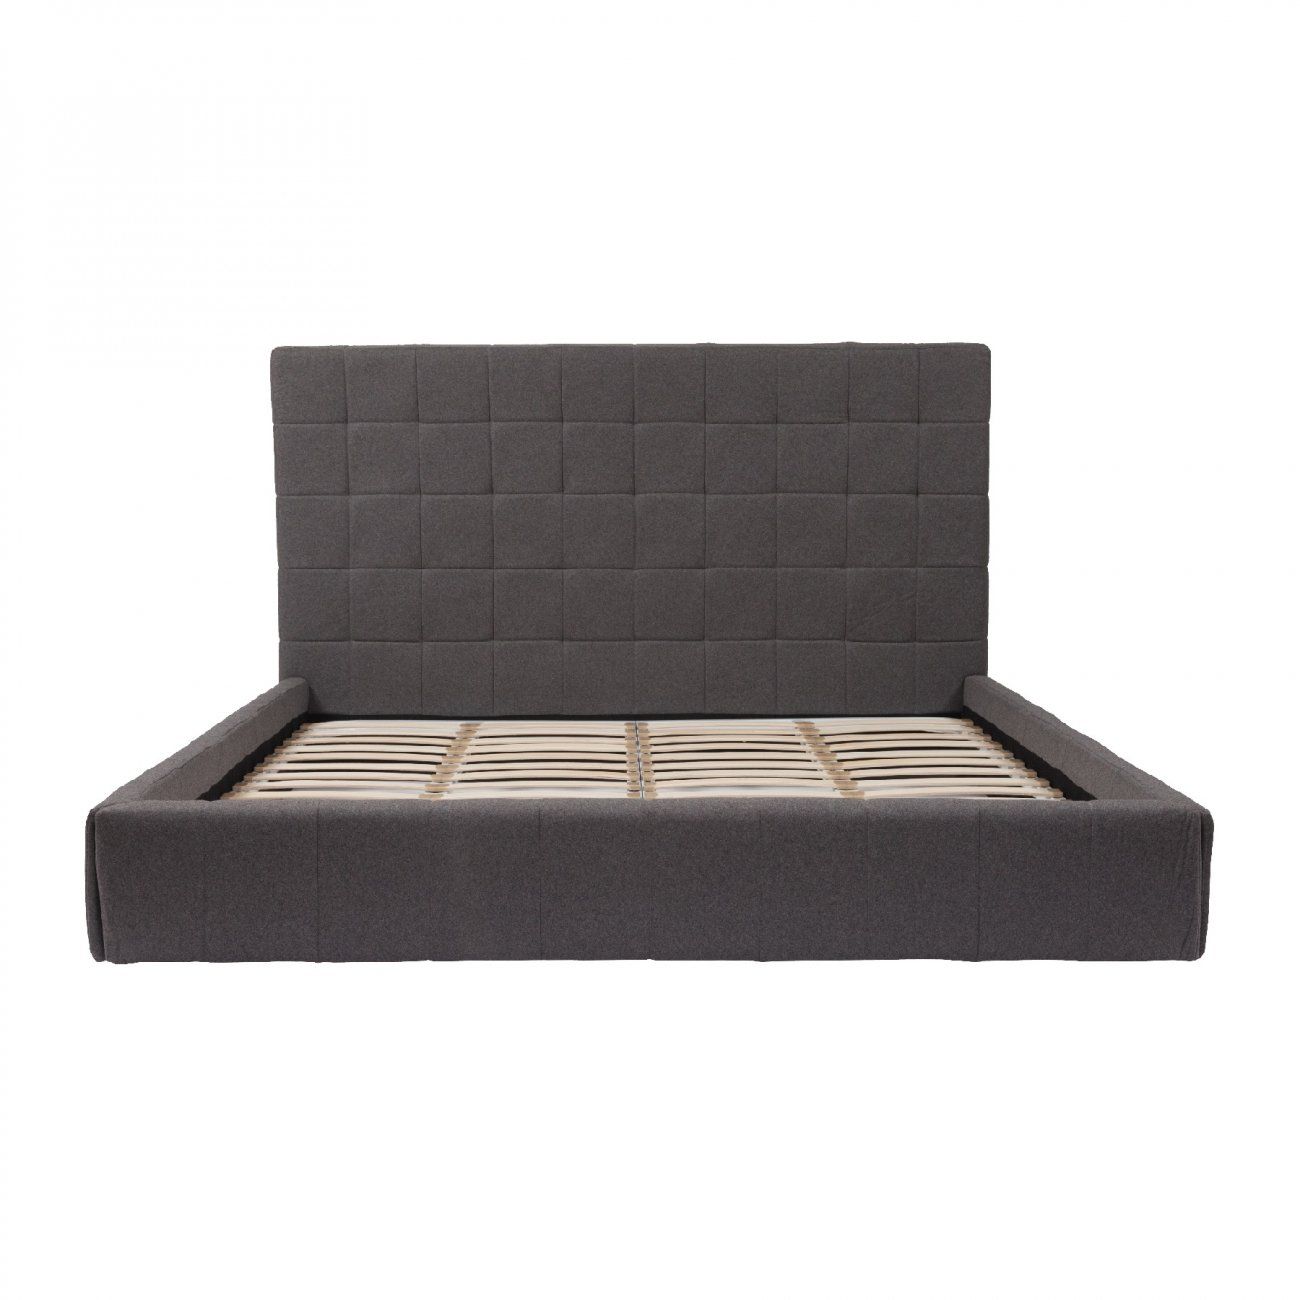 Double bed 160x200 grey Squaring Alto